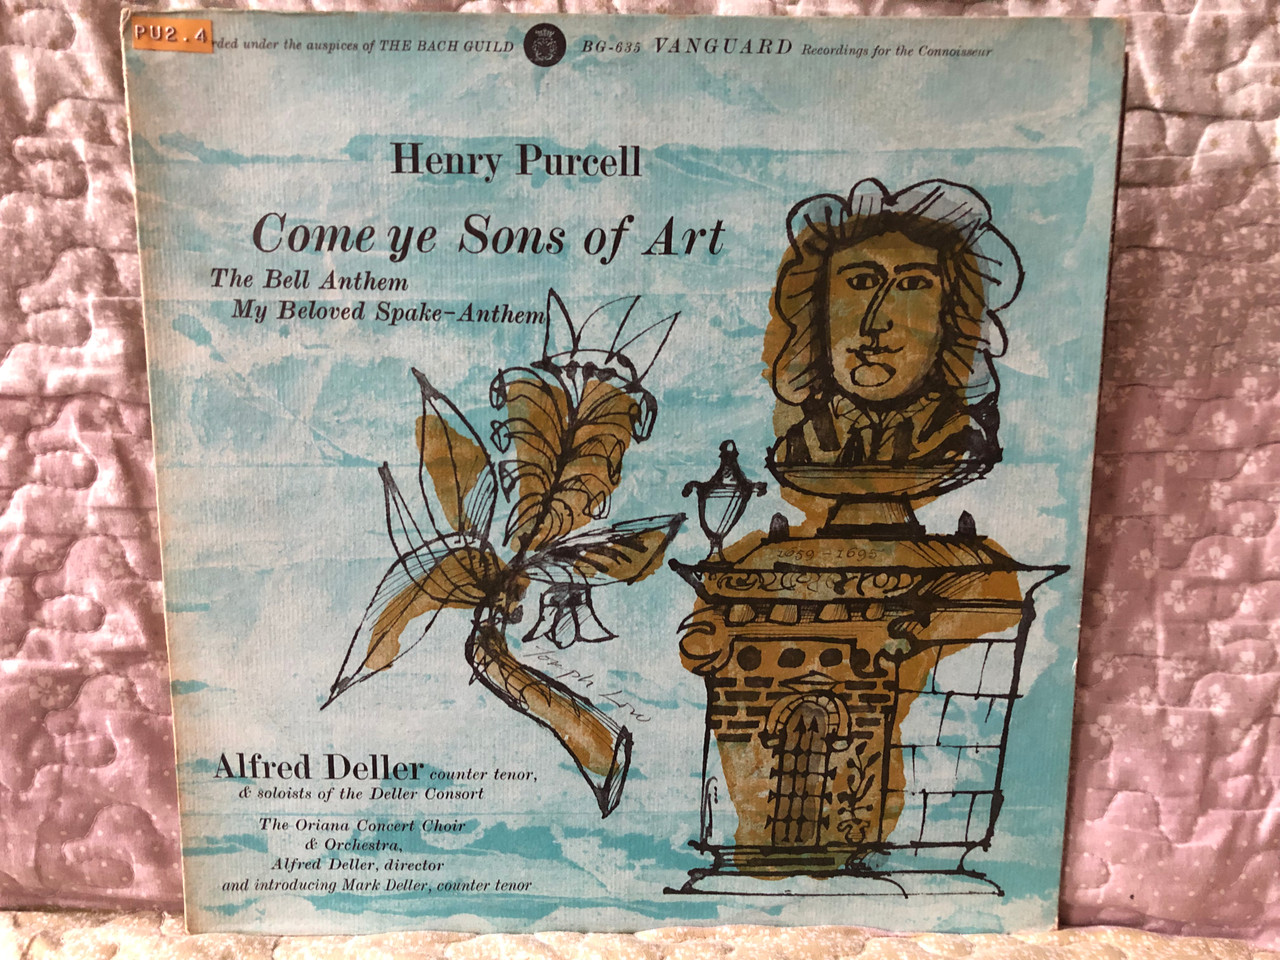 https://cdn10.bigcommerce.com/s-62bdpkt7pb/products/0/images/280995/Henry_Purcell_Come_Ye_Sons_Of_Art_The_Bell_Anthem_My_Beloved_SpakeAnthem_Alfred_Deller_counter_tenor_Soloists_of_the_Deller_Consort_The_Oriana_Concert_Choir_Orchestra_Mark_Deller_1__38105.1688483972.1280.1280.JPG?c=2&_gl=1*1ex89c*_ga*MjA2NTIxMjE2MC4xNTkwNTEyNTMy*_ga_WS2VZYPC6G*MTY4ODQ3Mjc3MS45NzMuMS4xNjg4NDgzNzI0LjQzLjAuMA..